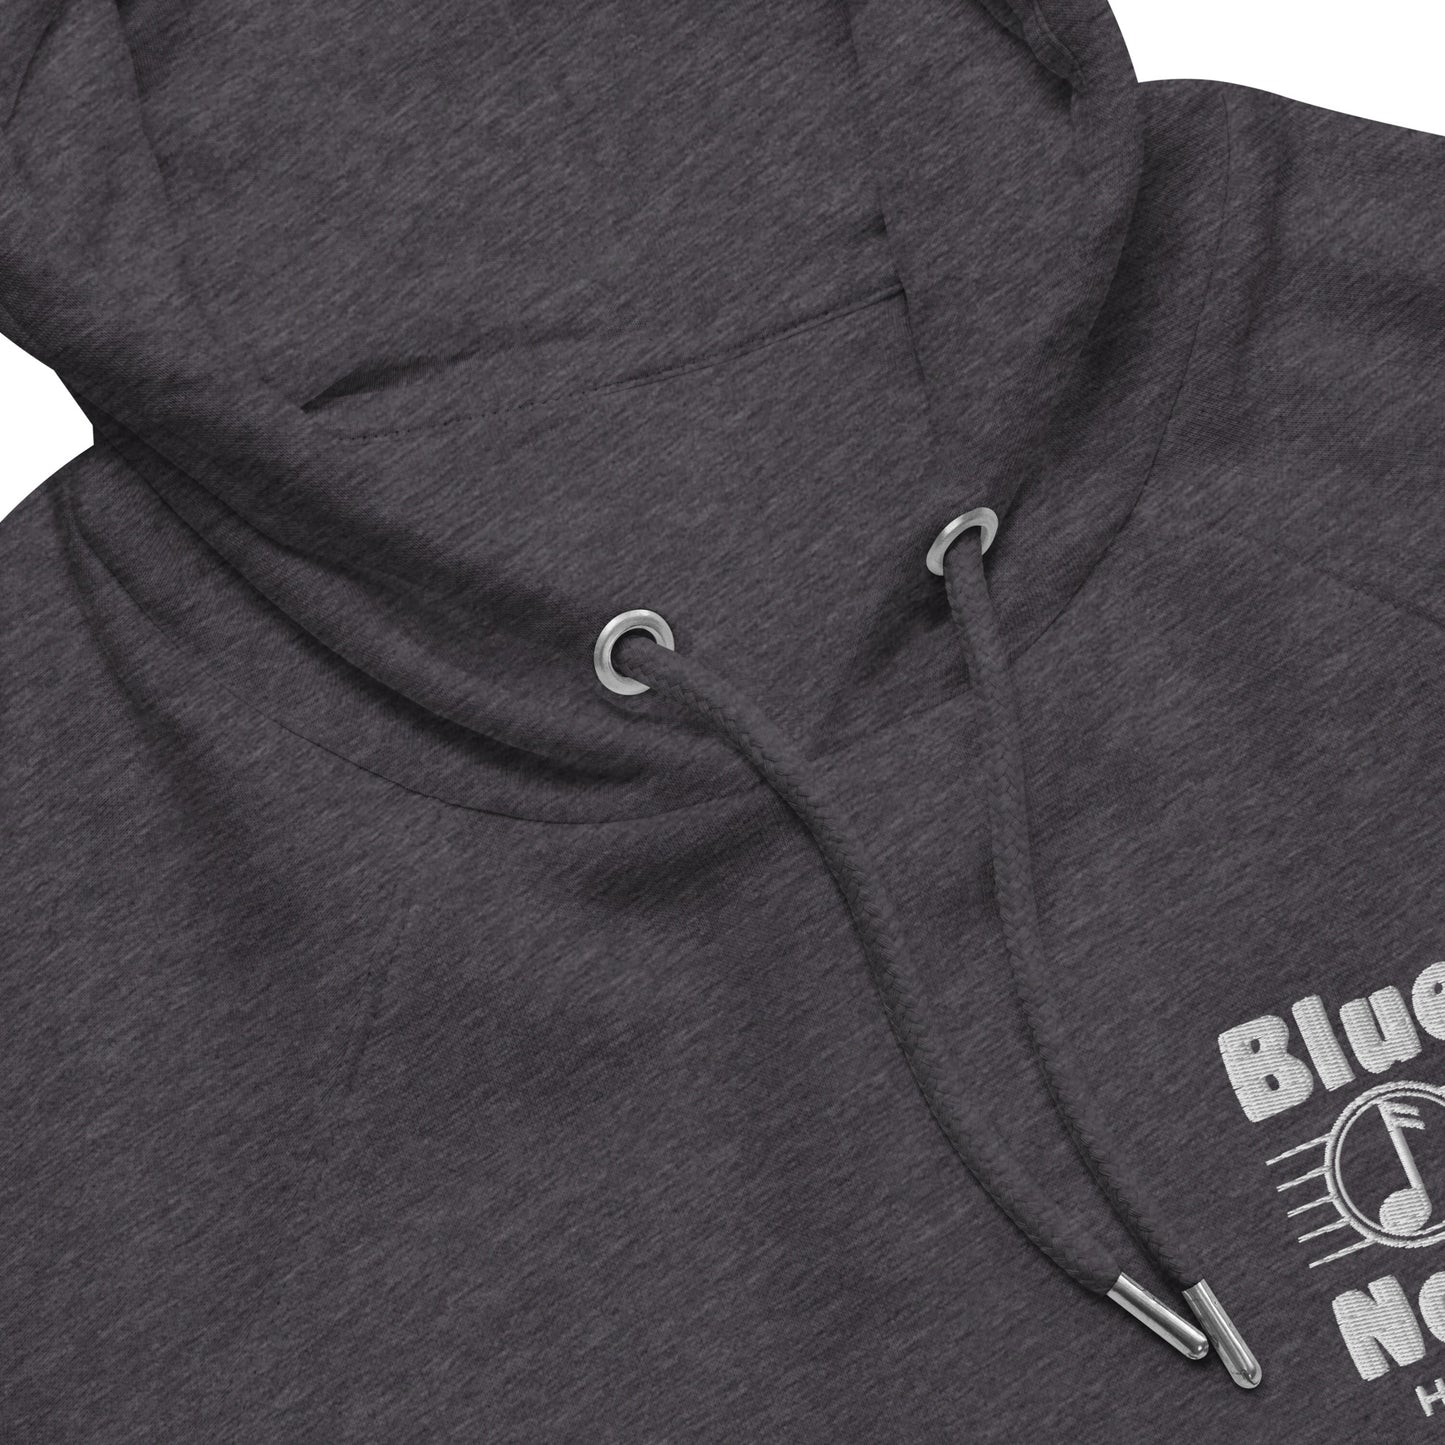 Blue Note Embroidered Organic Cotton Hoodie